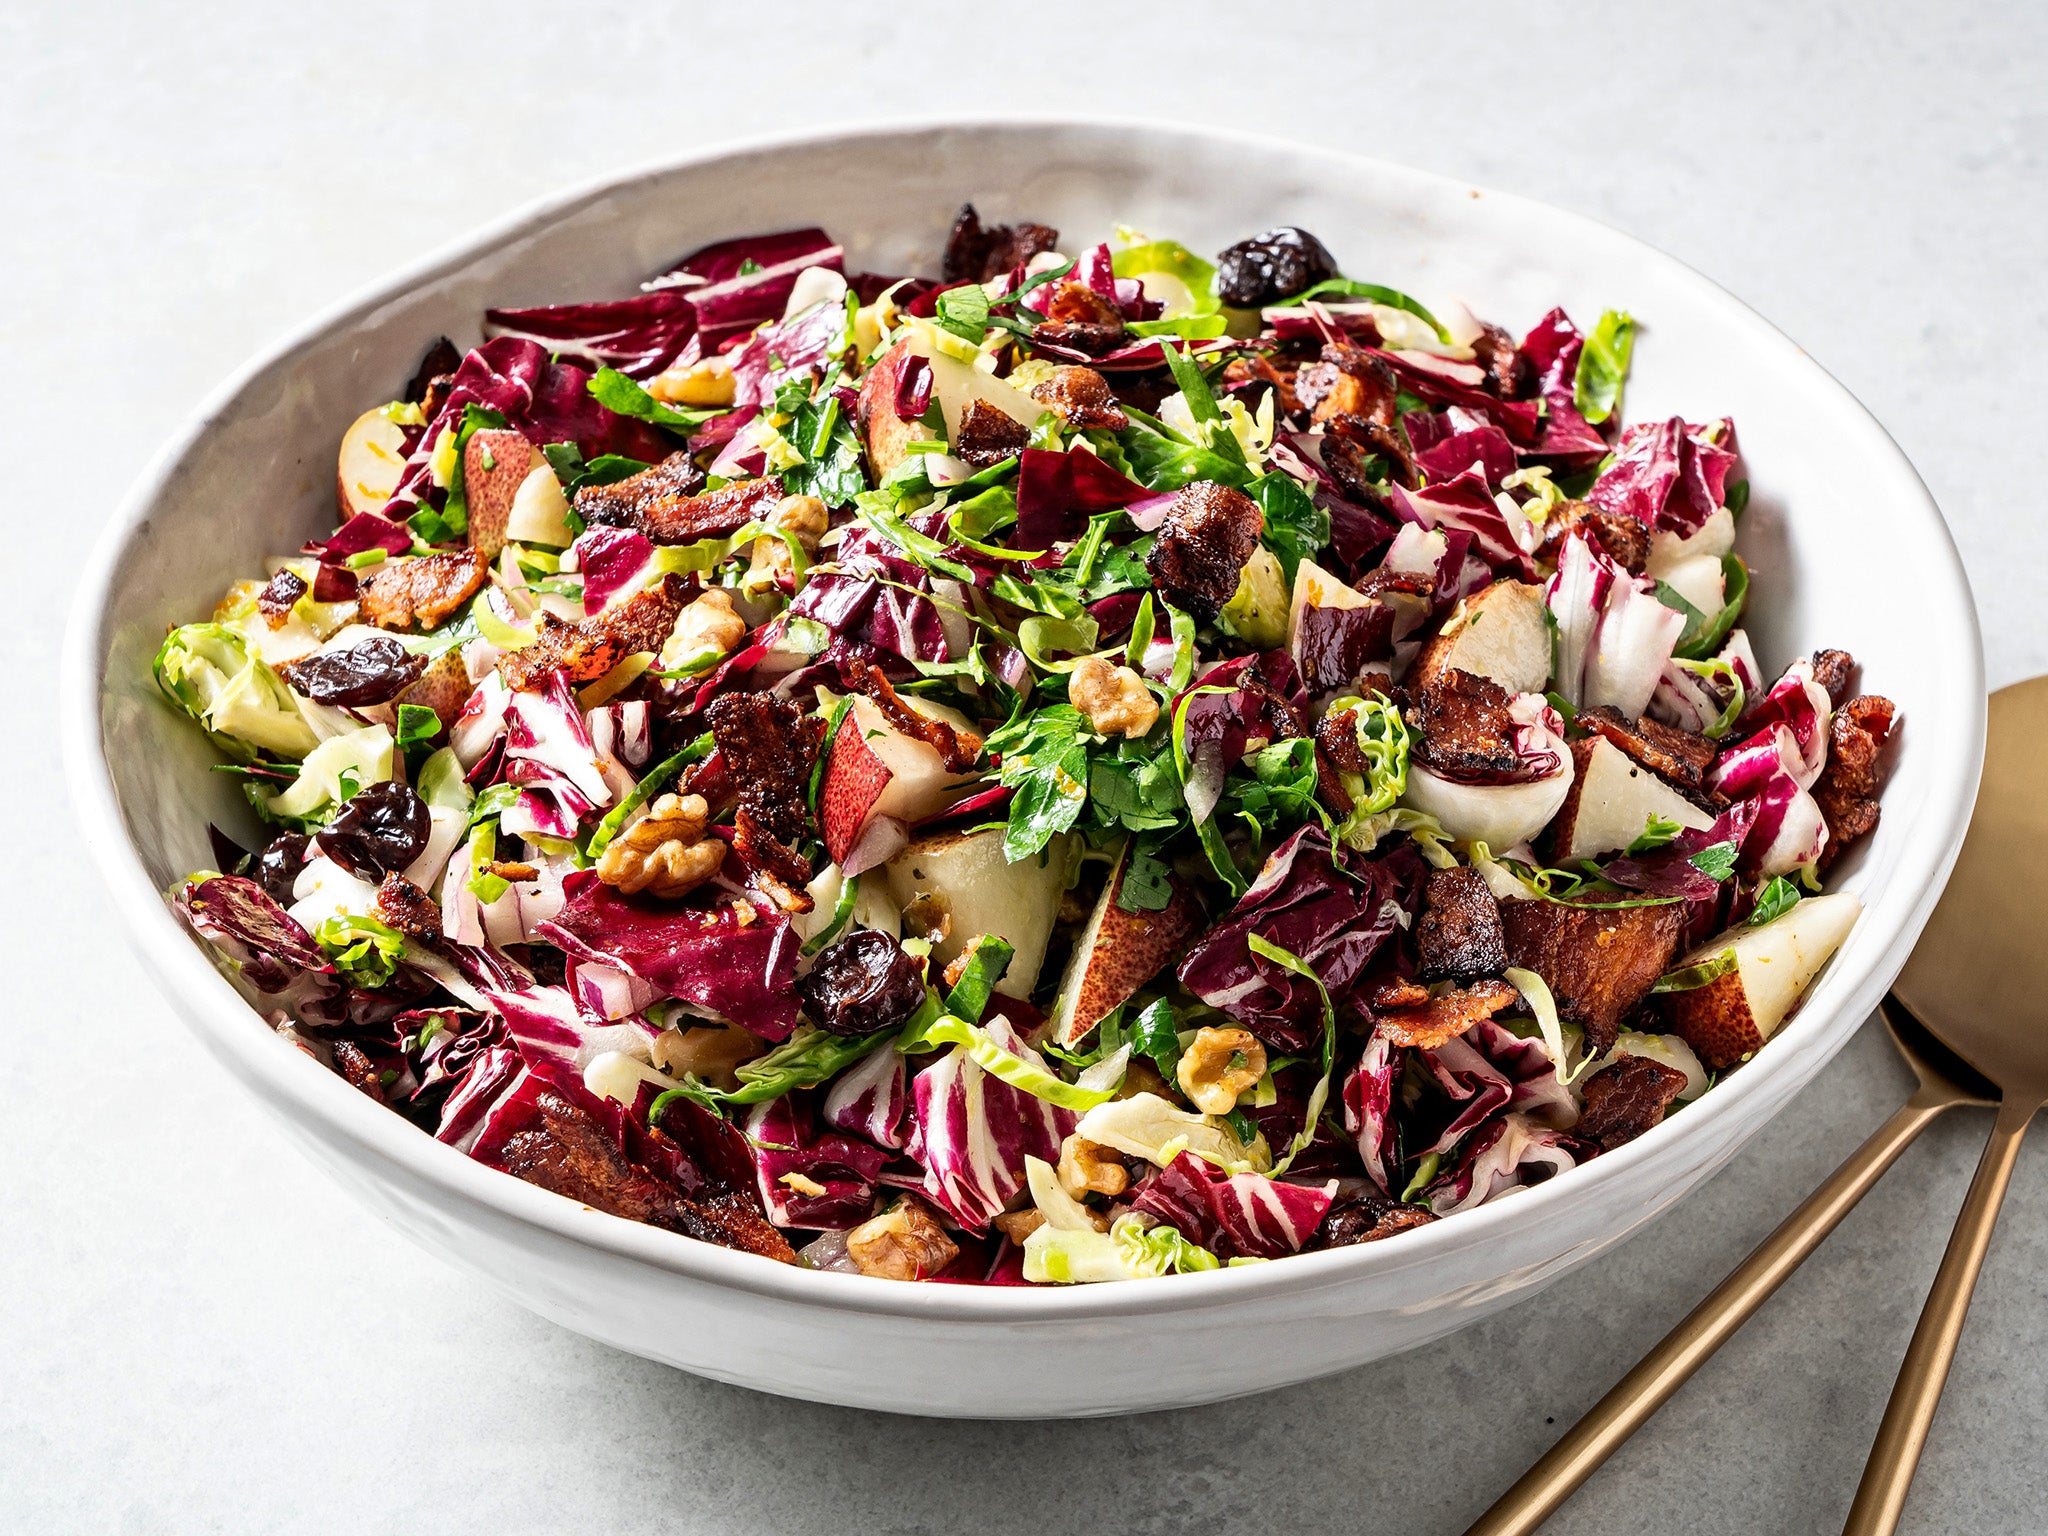 This hearty salad is a meal in itself, but it also makes a great accompaniment to roasted meats